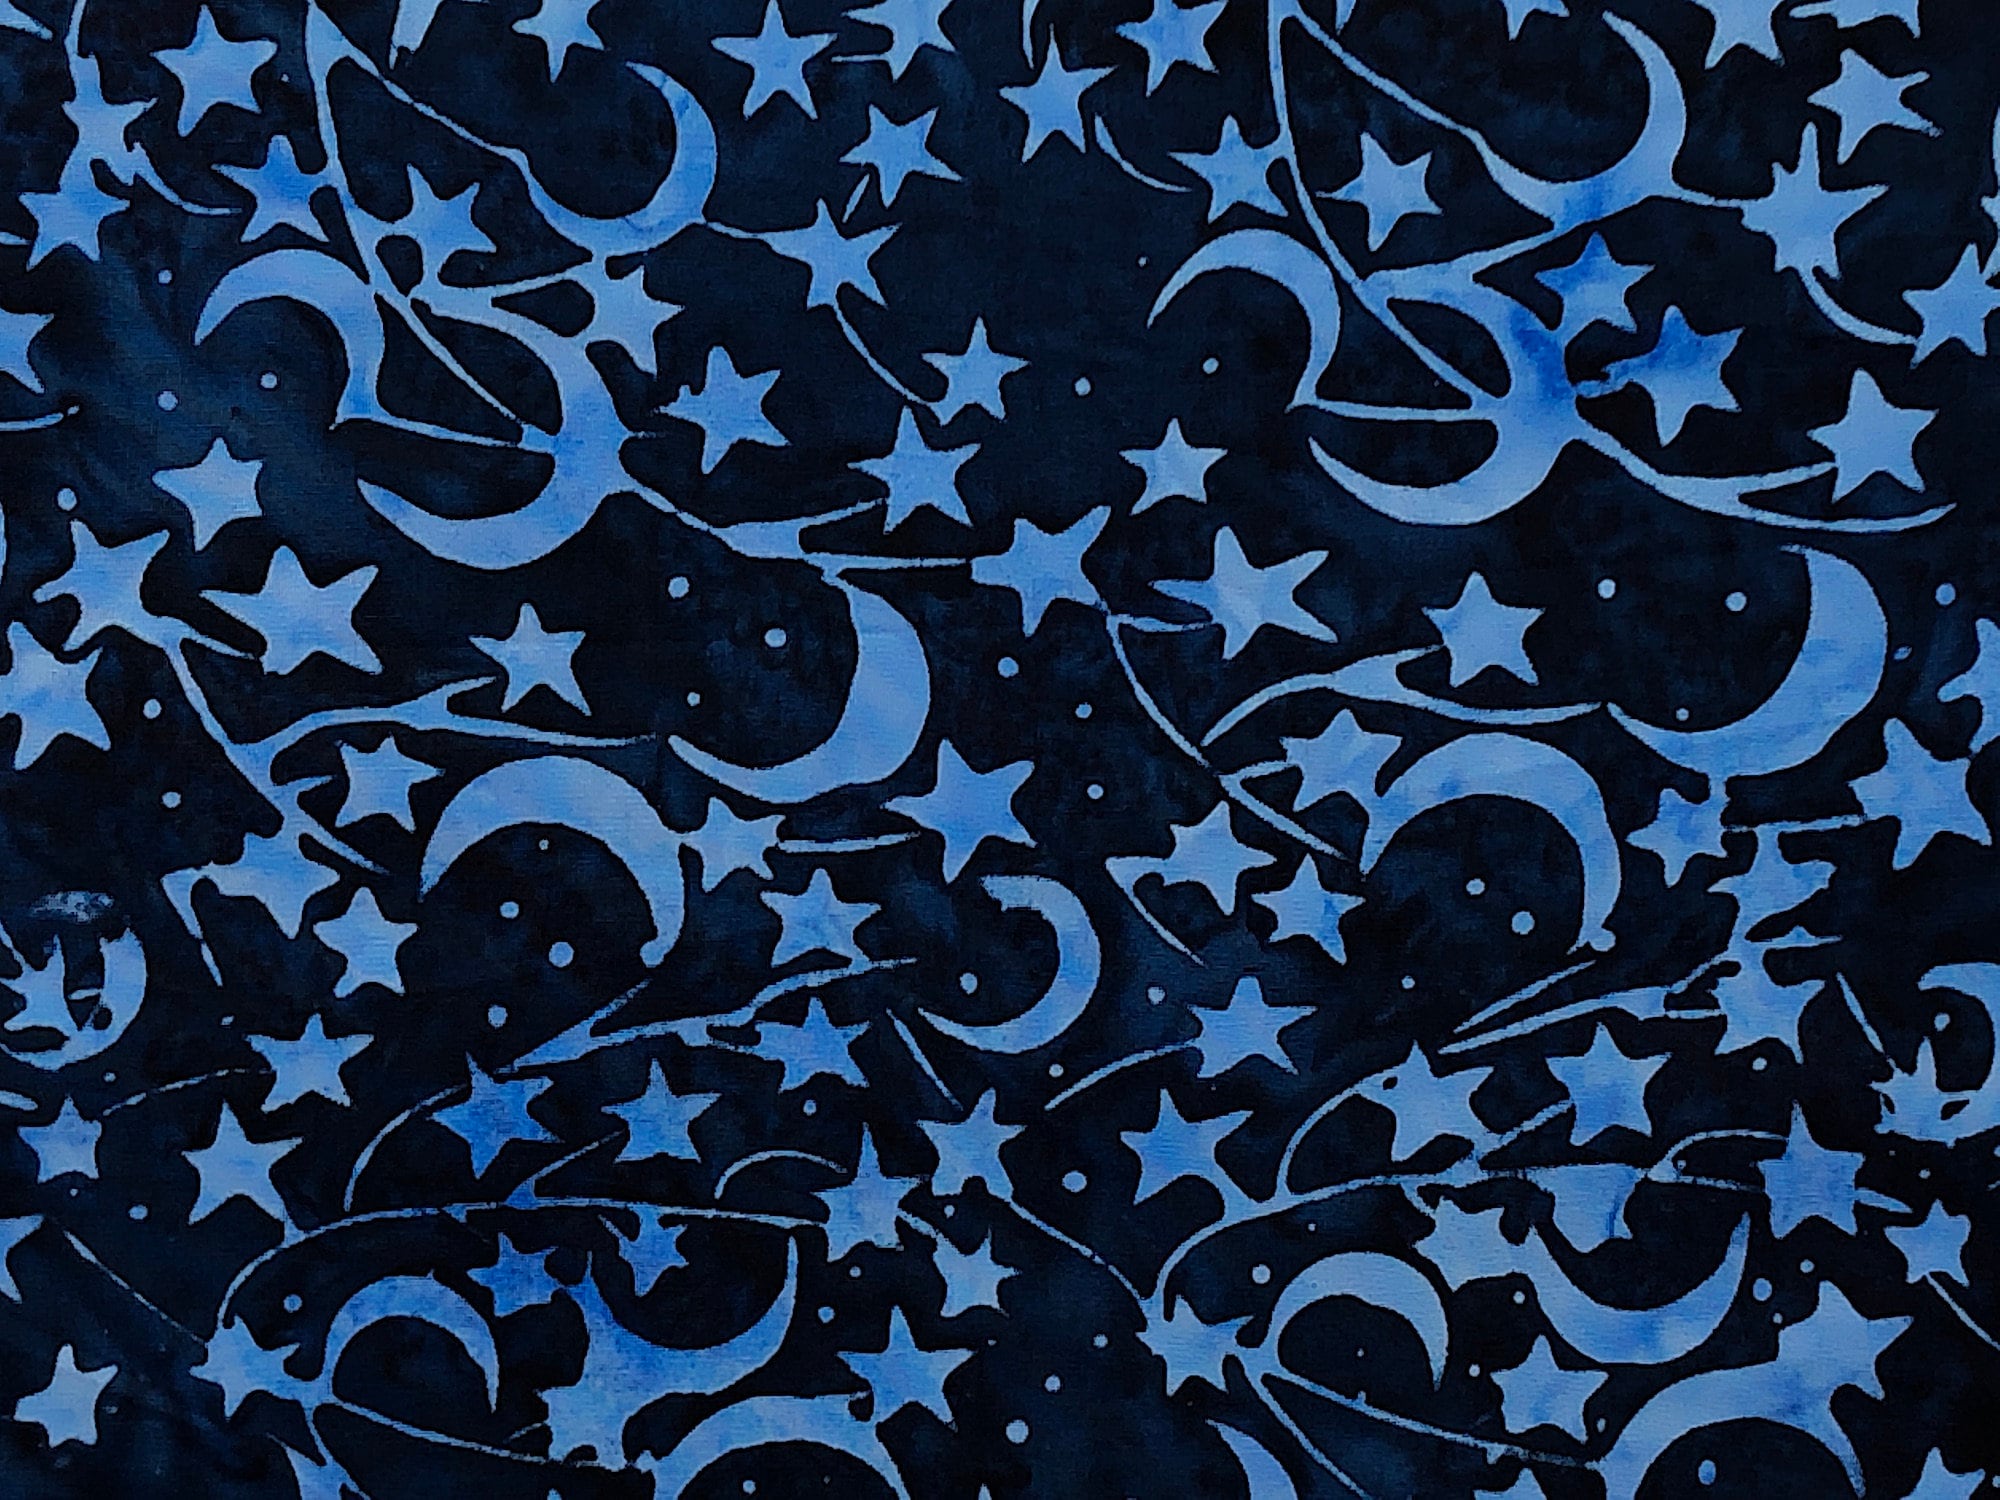 Close up of blue moons and stars on a dark blue batik cotton fabric.